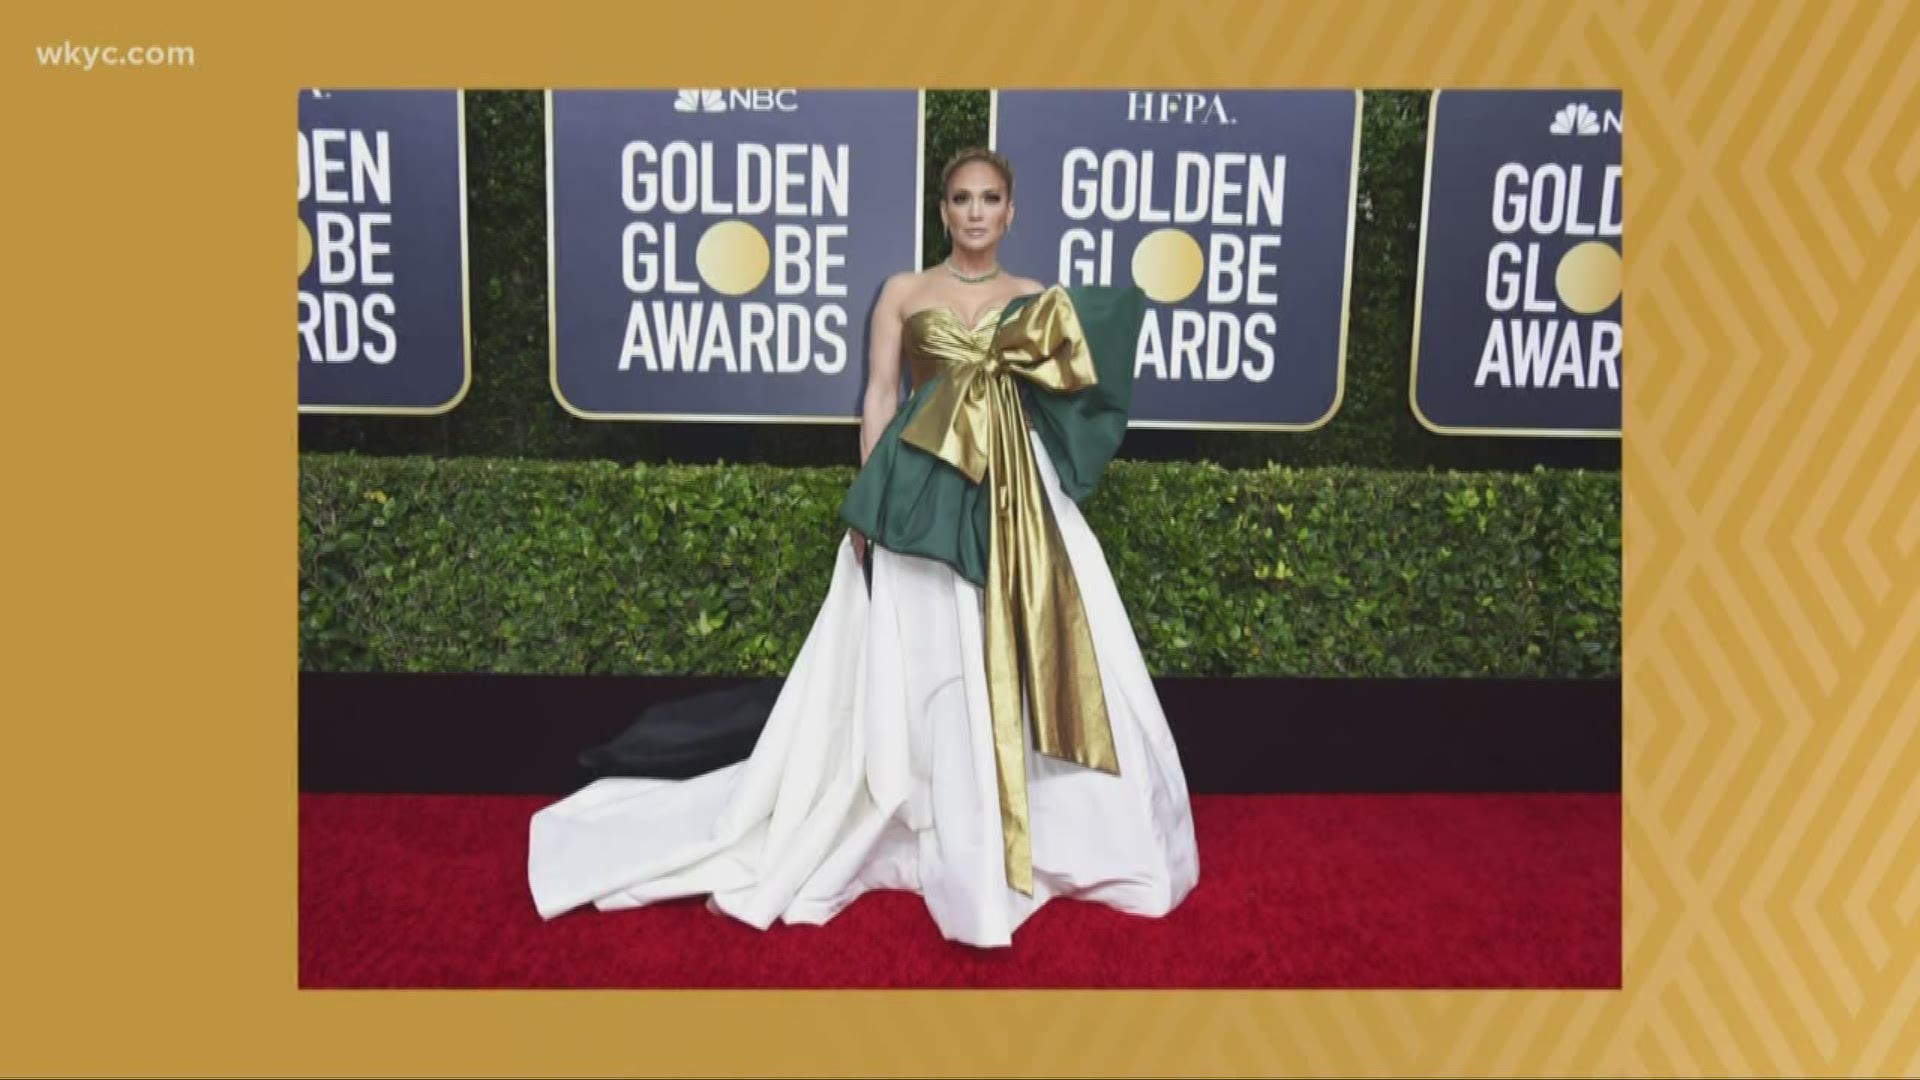 Jan. 6, 2020: Lights! Camera! Fashion! The Wardrobe Consultant Hallie Abrams discusses the best looks from the 2020 Golden Globe Awards.